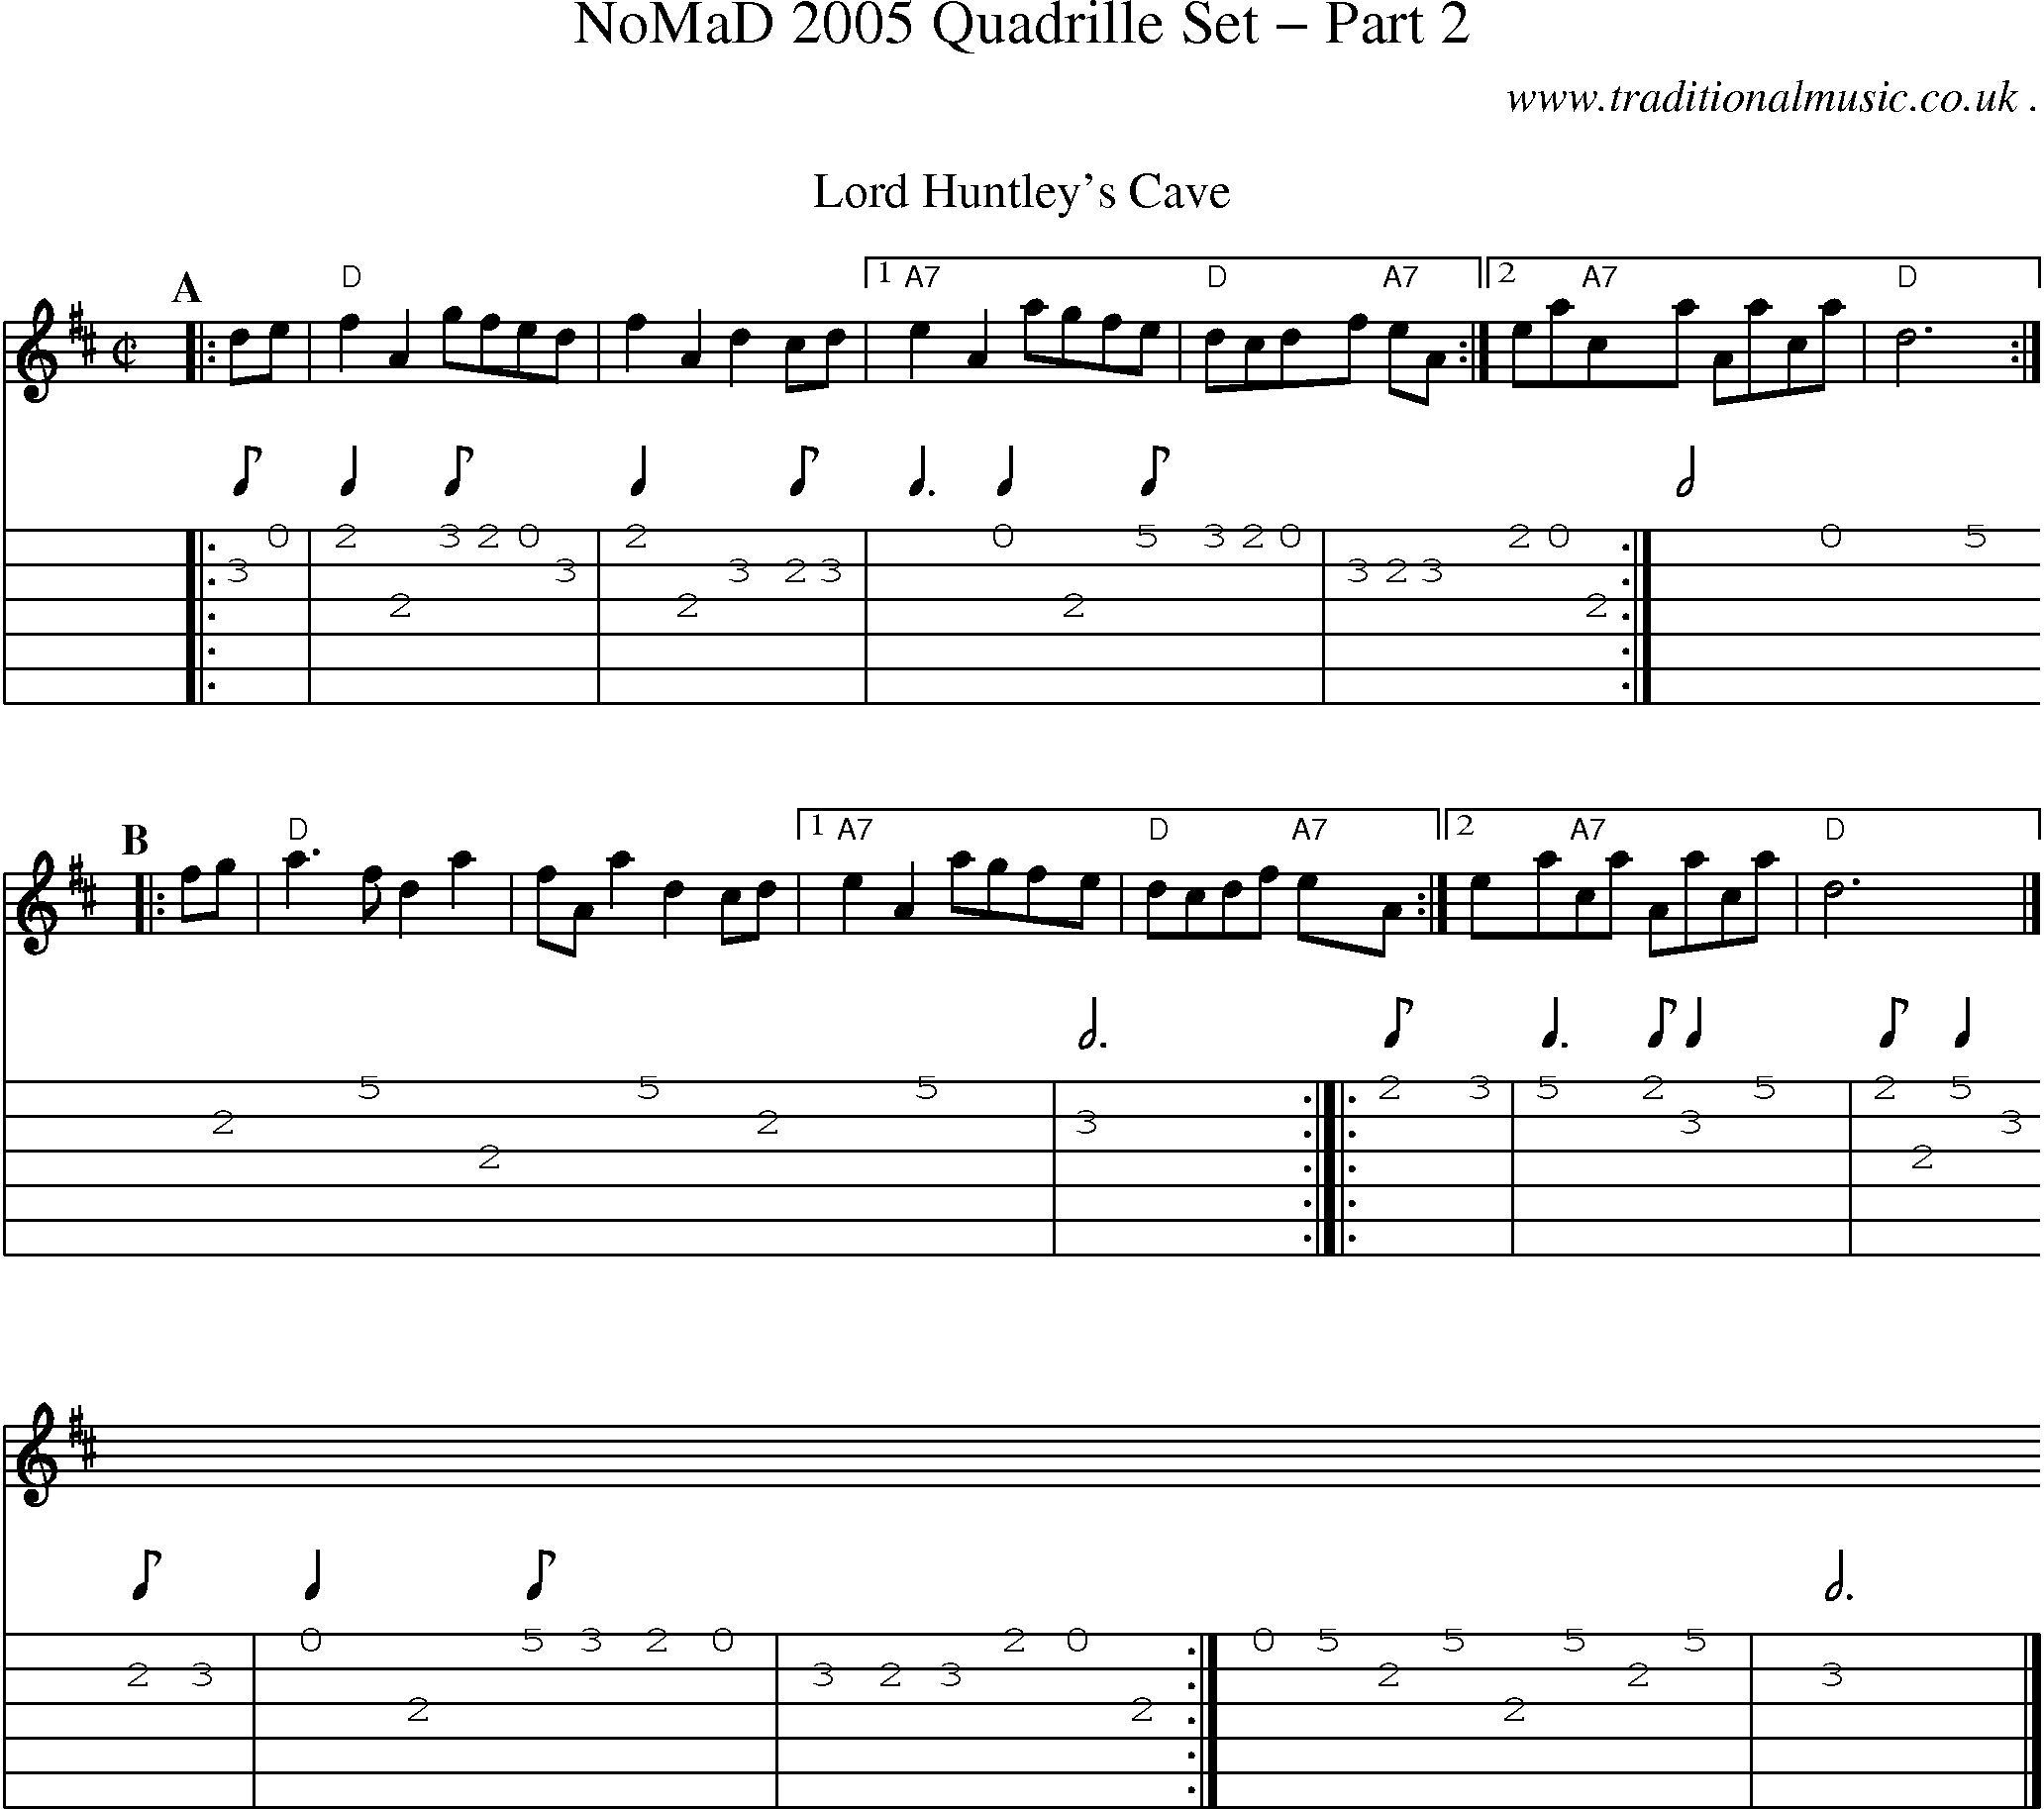 Sheet-music  score, Chords and Guitar Tabs for Nomad 2005 Quadrille Set Part 2